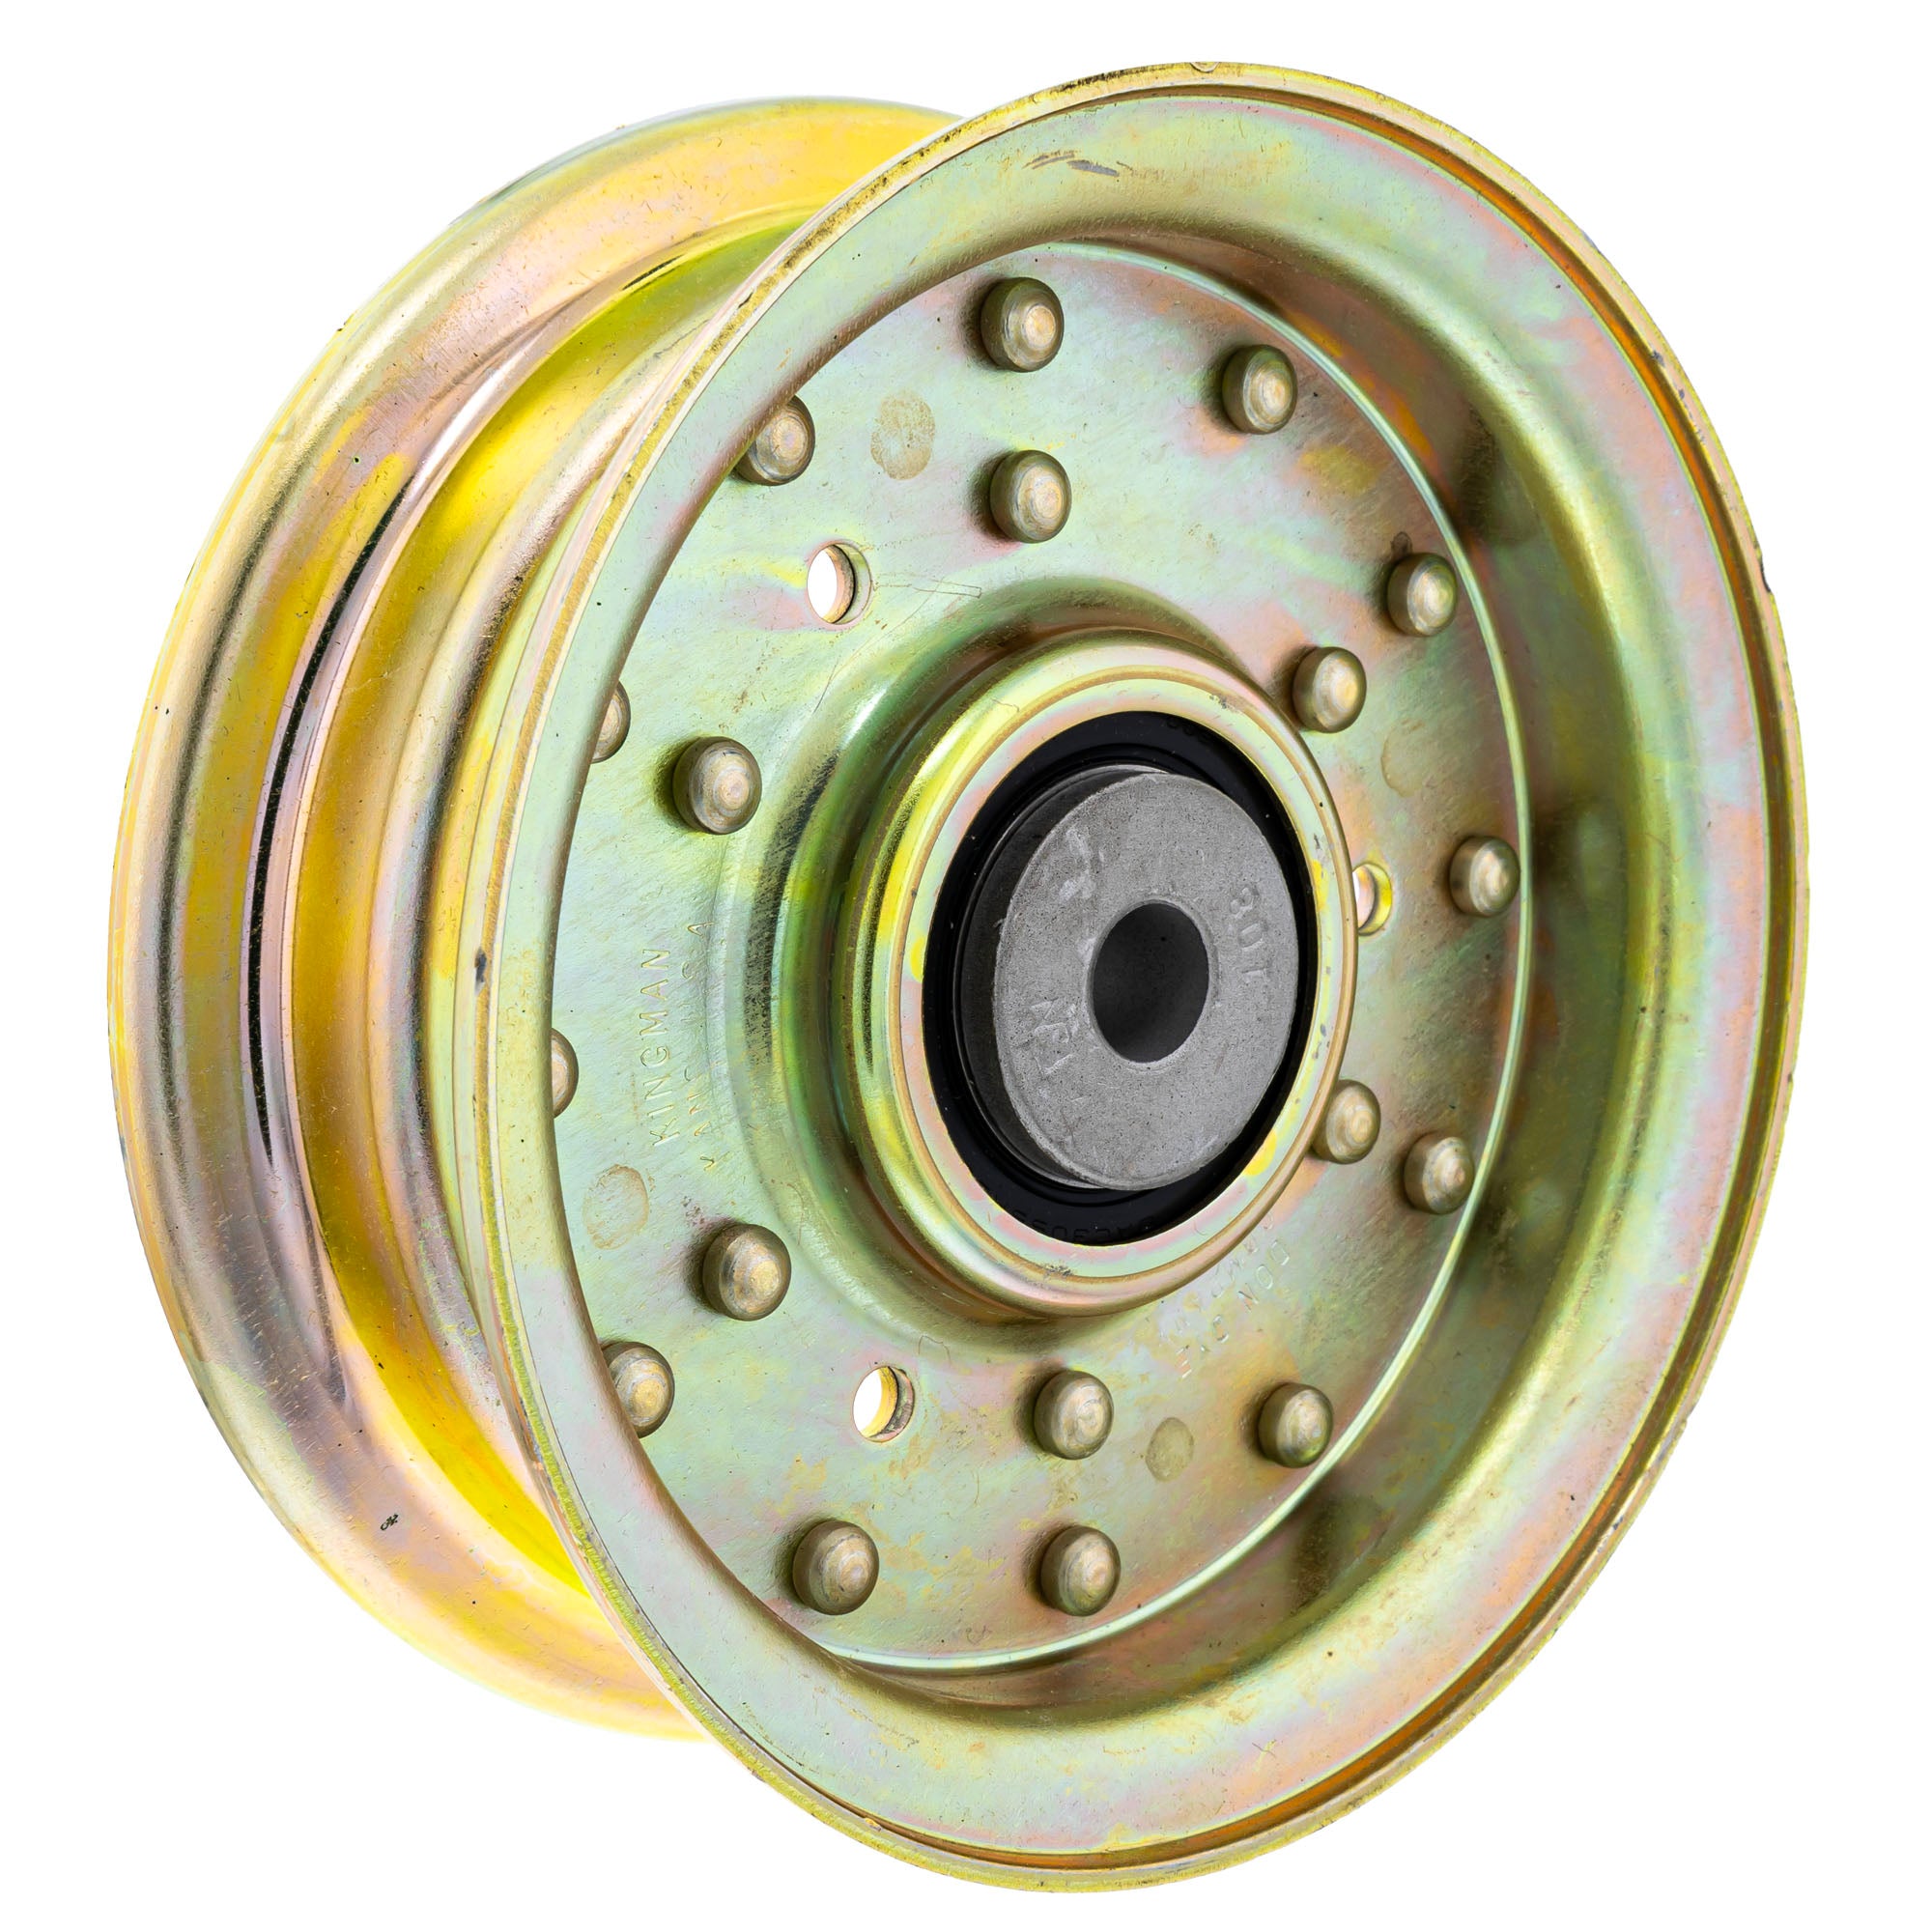 John Deere TCA17541 Sheave Idler Pulley | Mow The Lawn